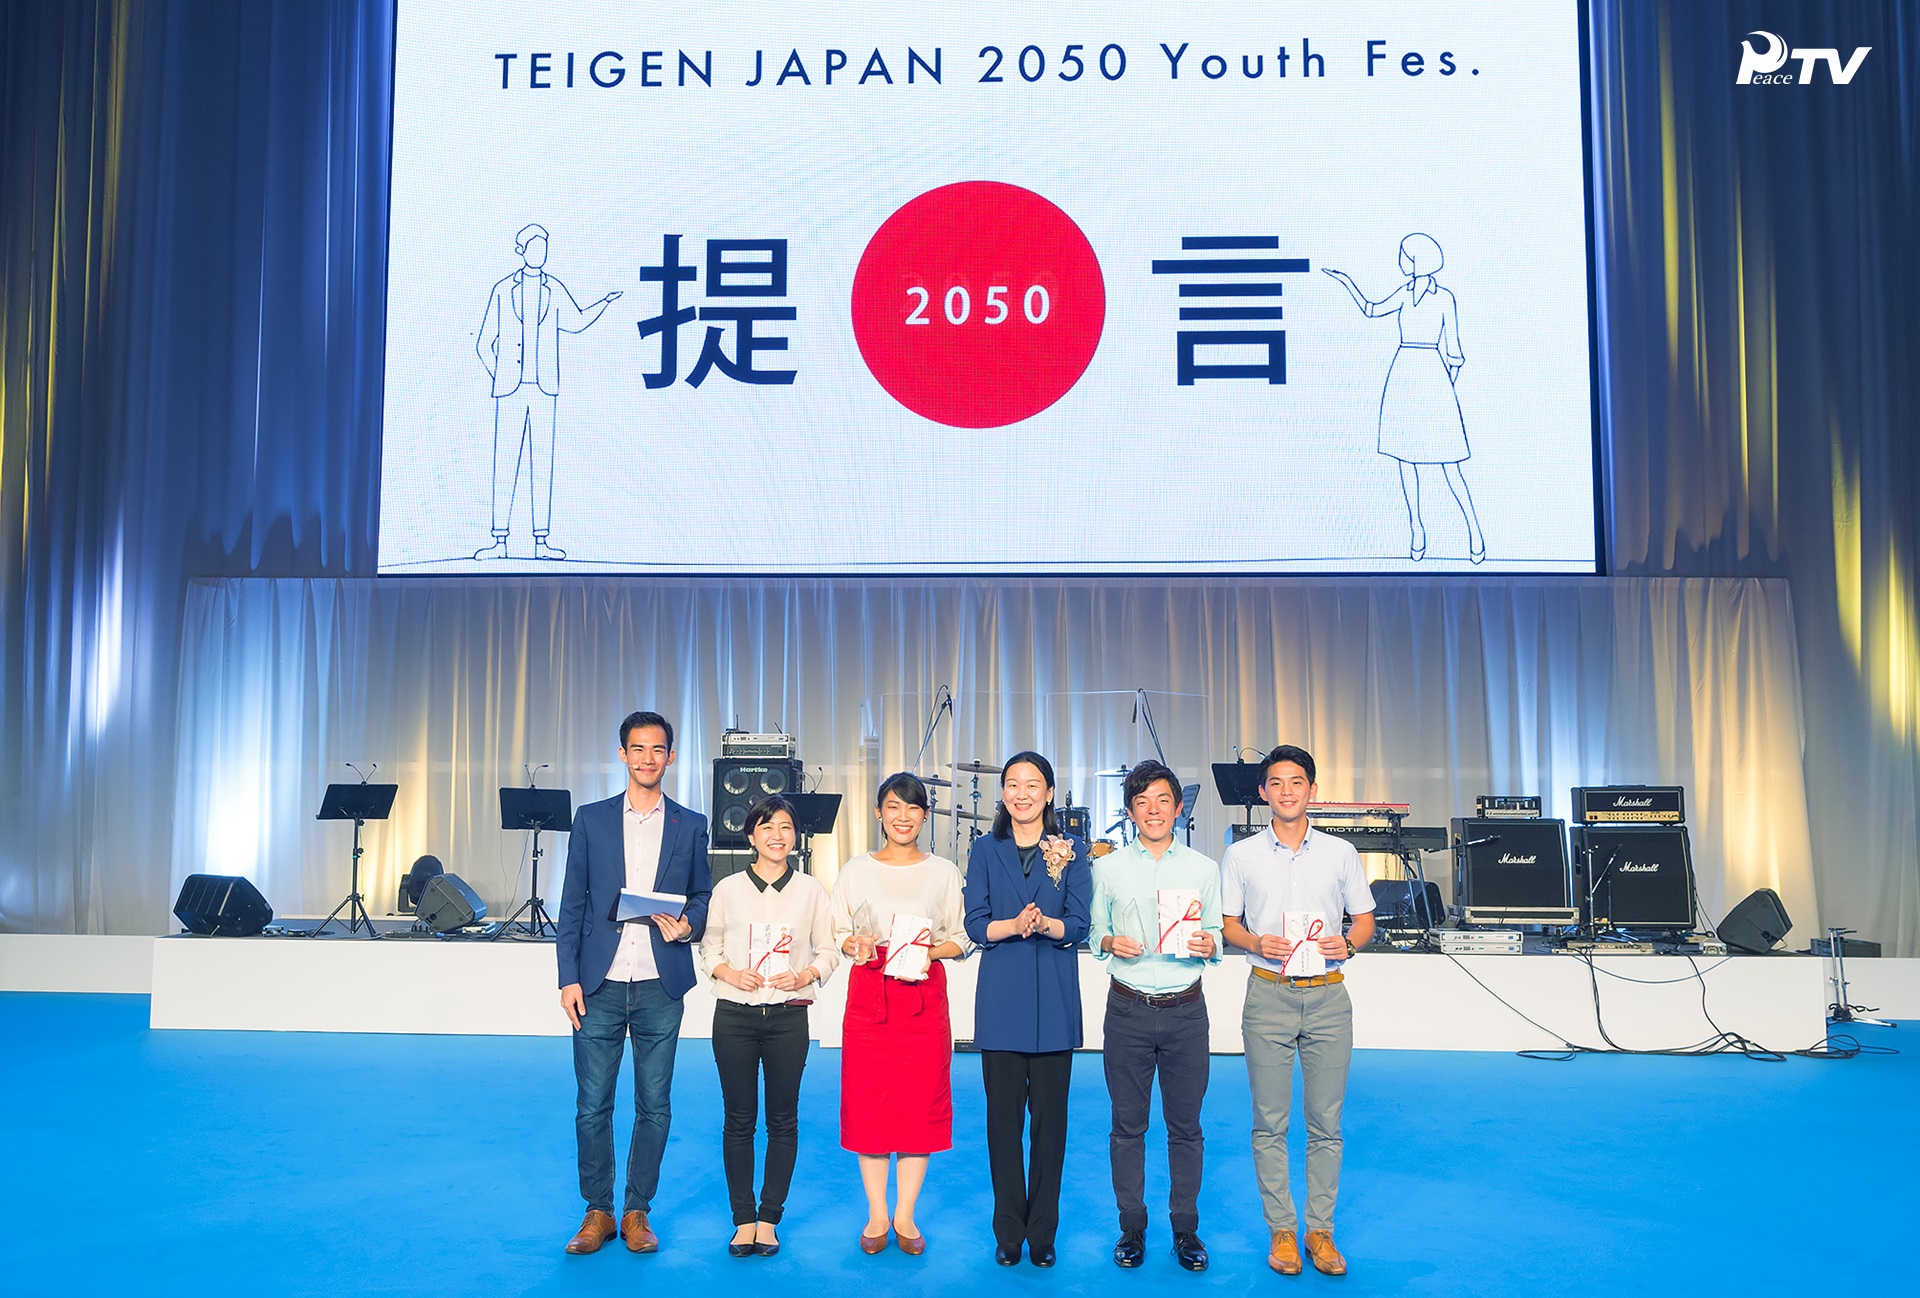 'Proposal for 2050' Japan Youth Festival (September 9 - Makuhari Messe Convention Center in Chiba)